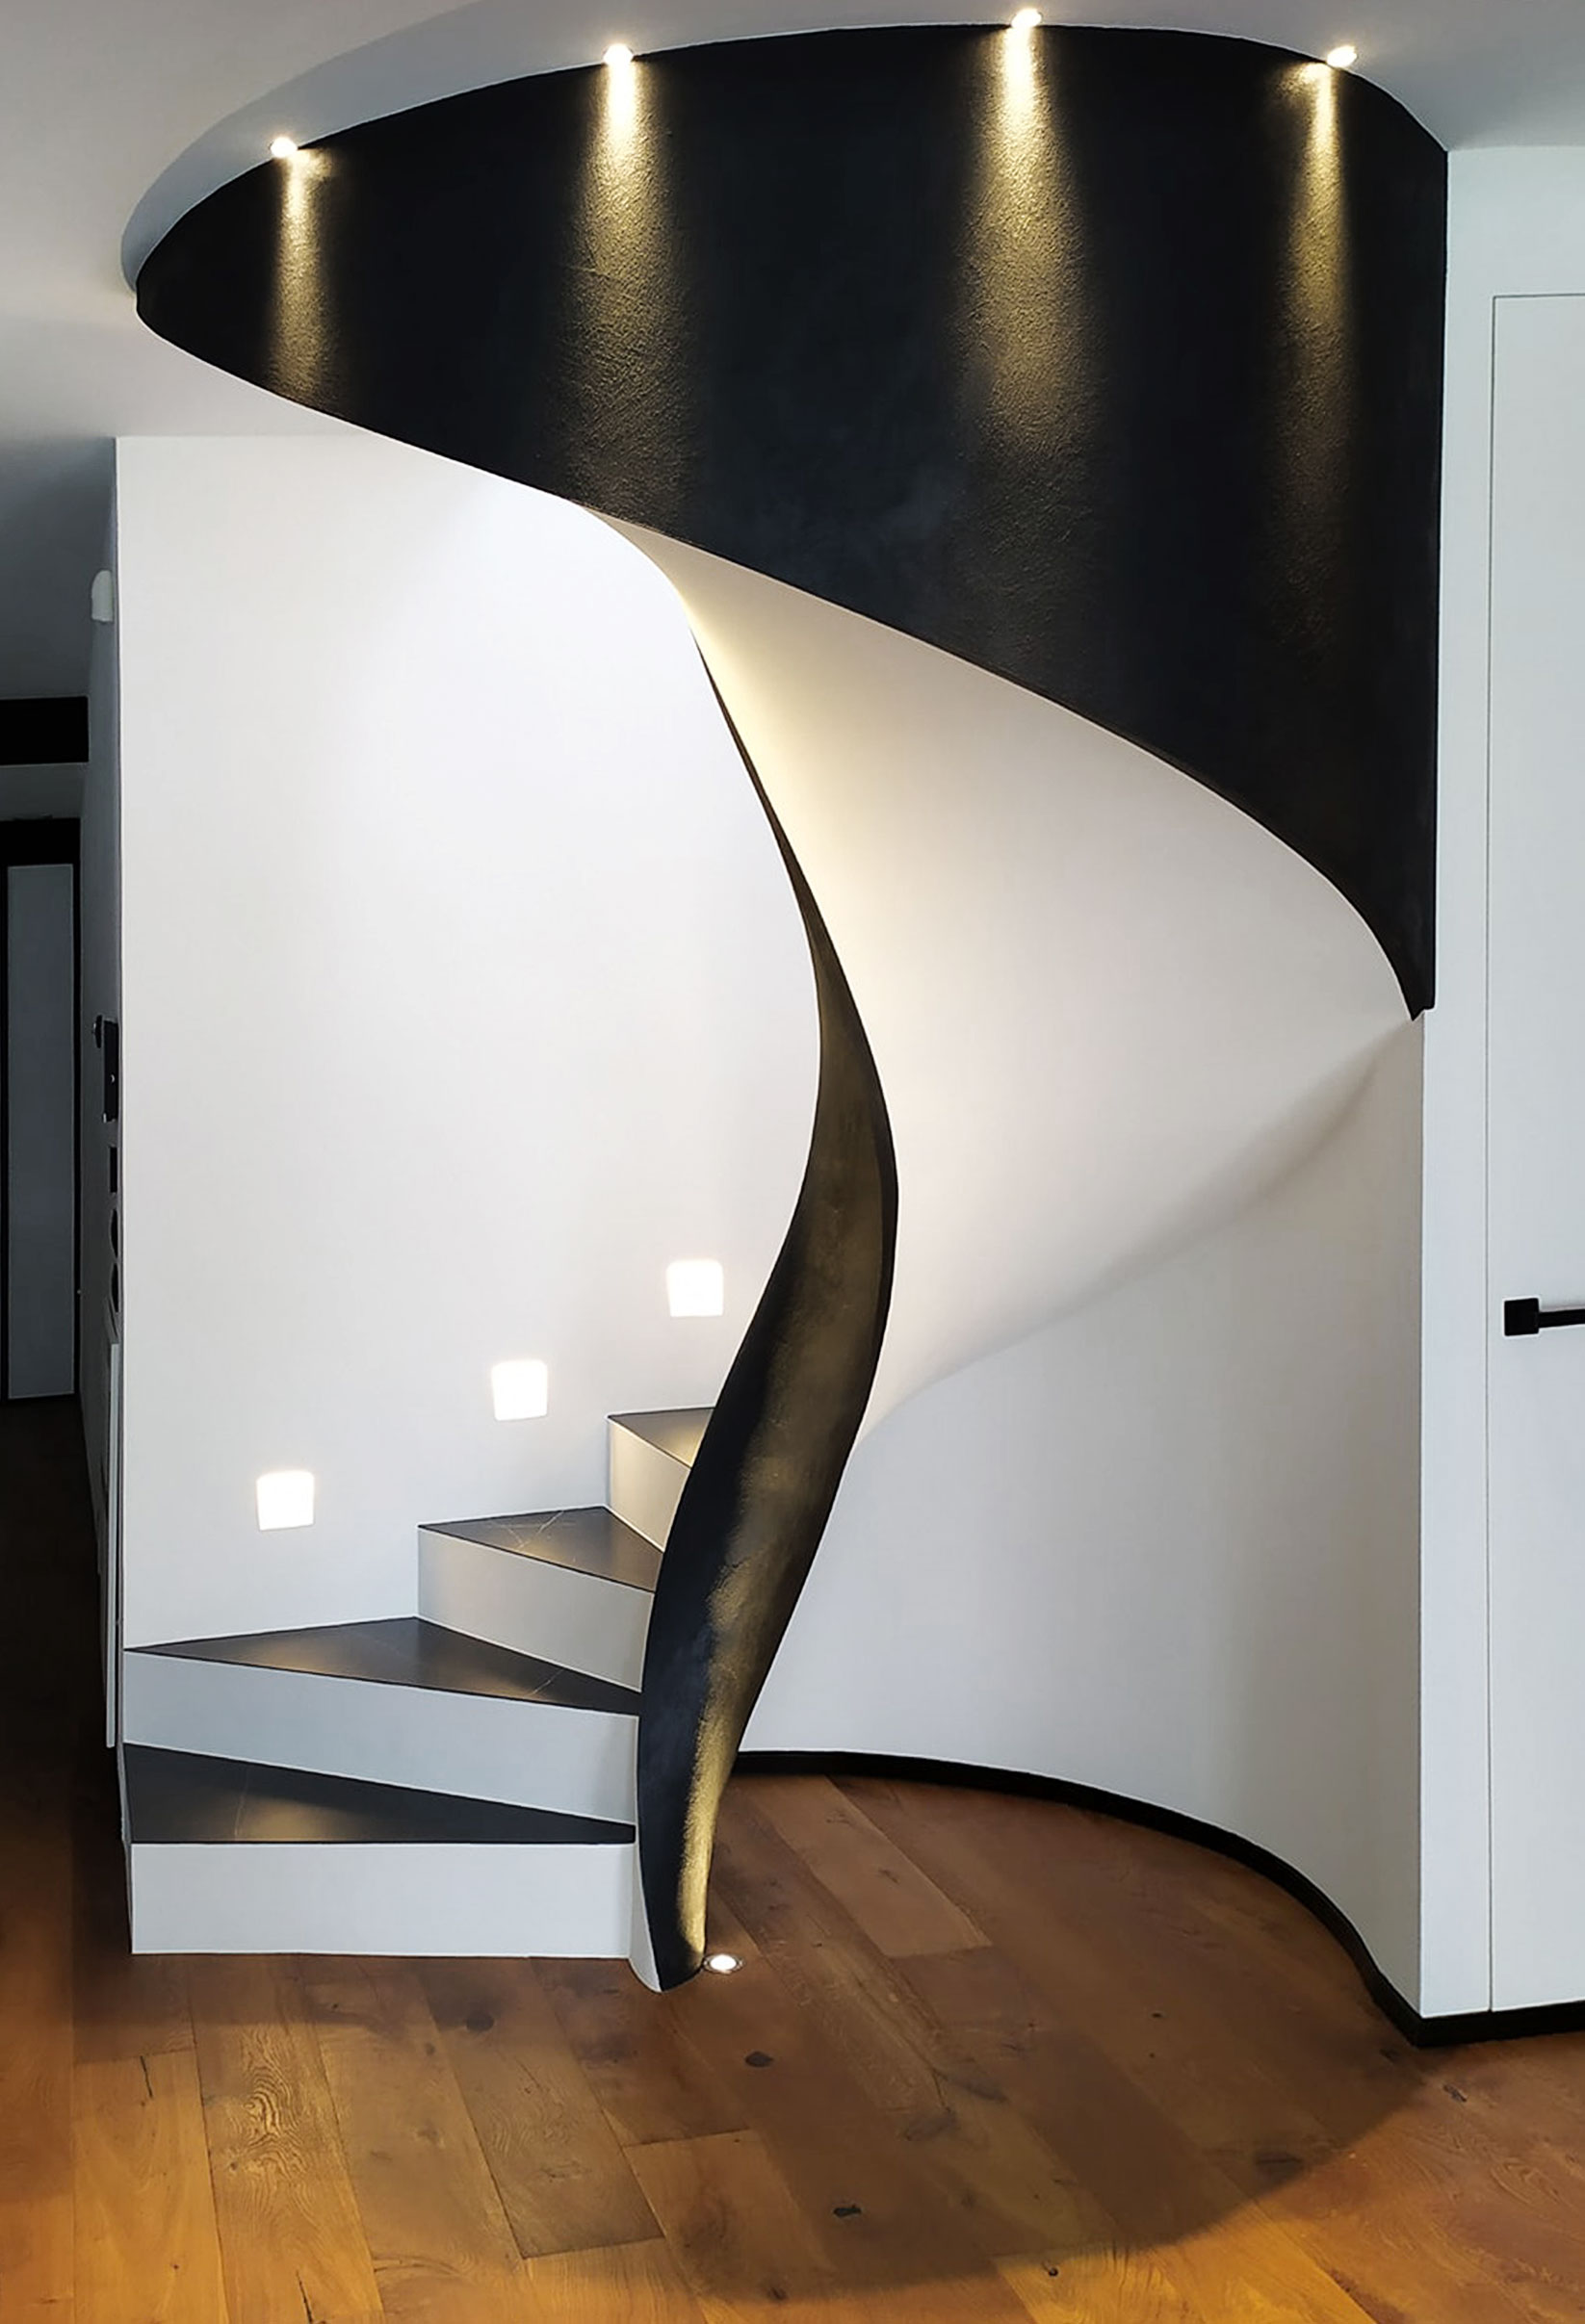 Design and construction of customised helical staircases